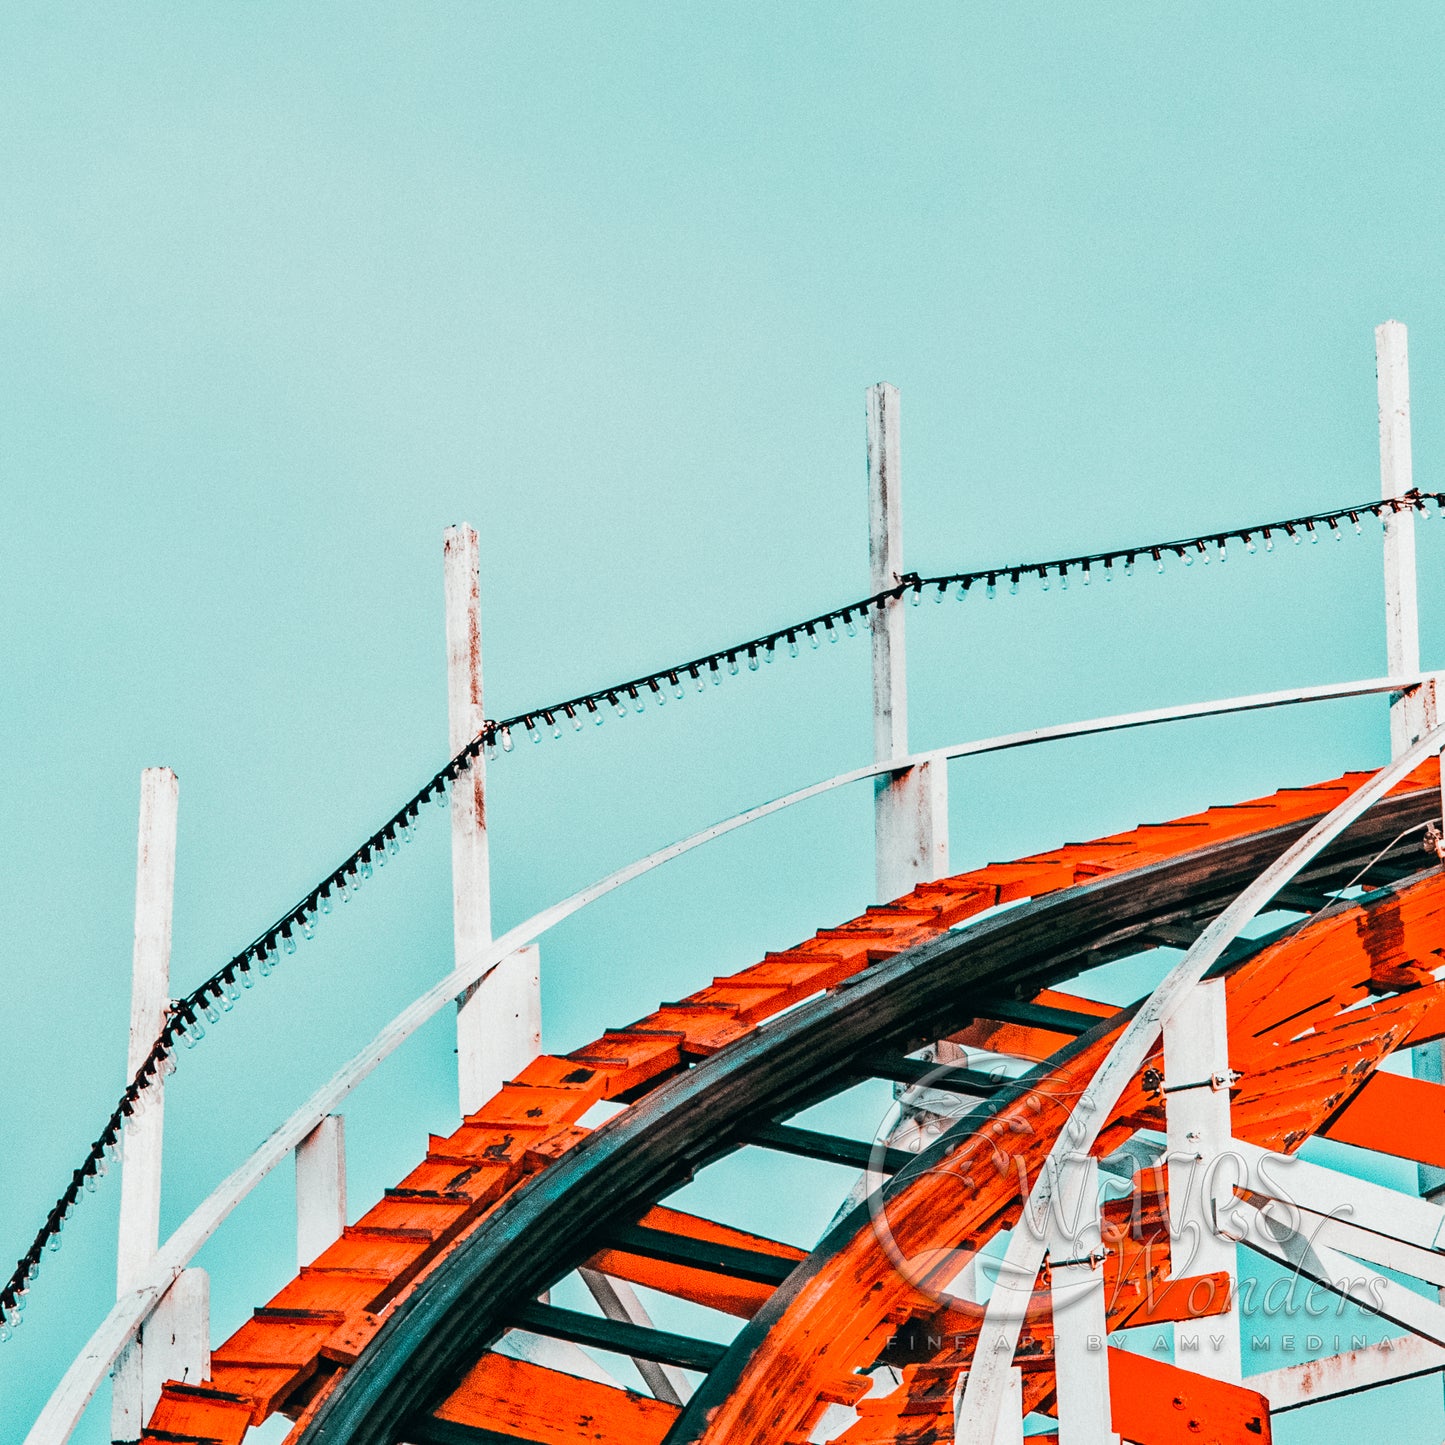 a close up of a roller coaster against a blue sky